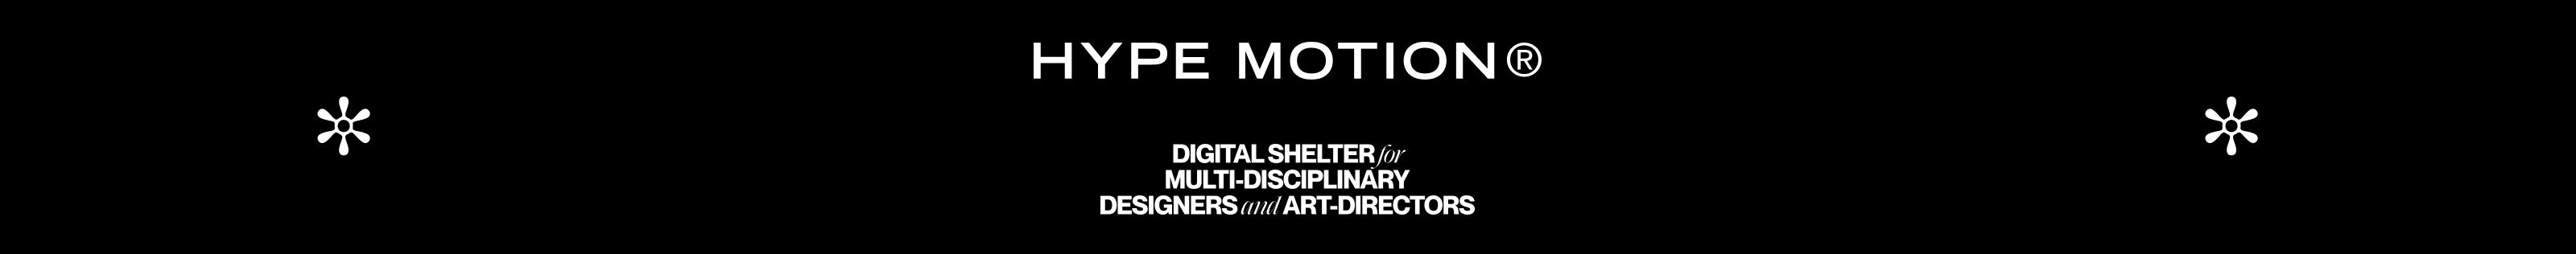 HYPE MOTION's profile banner